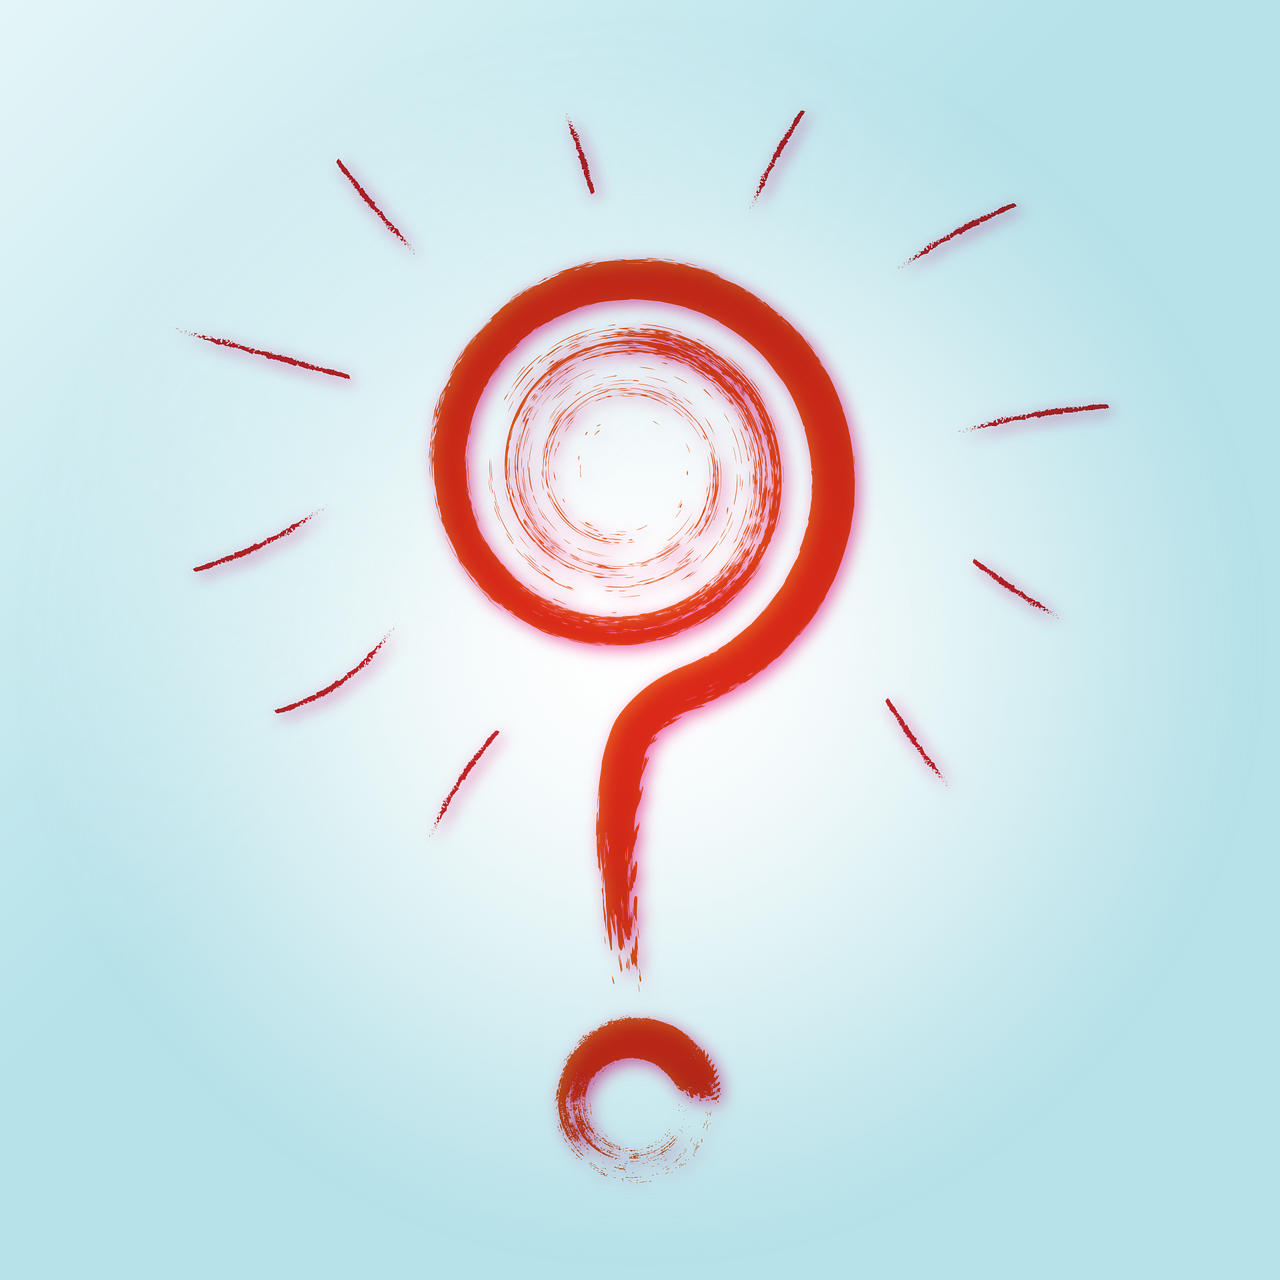 question mark, background, red-4375860.jpg